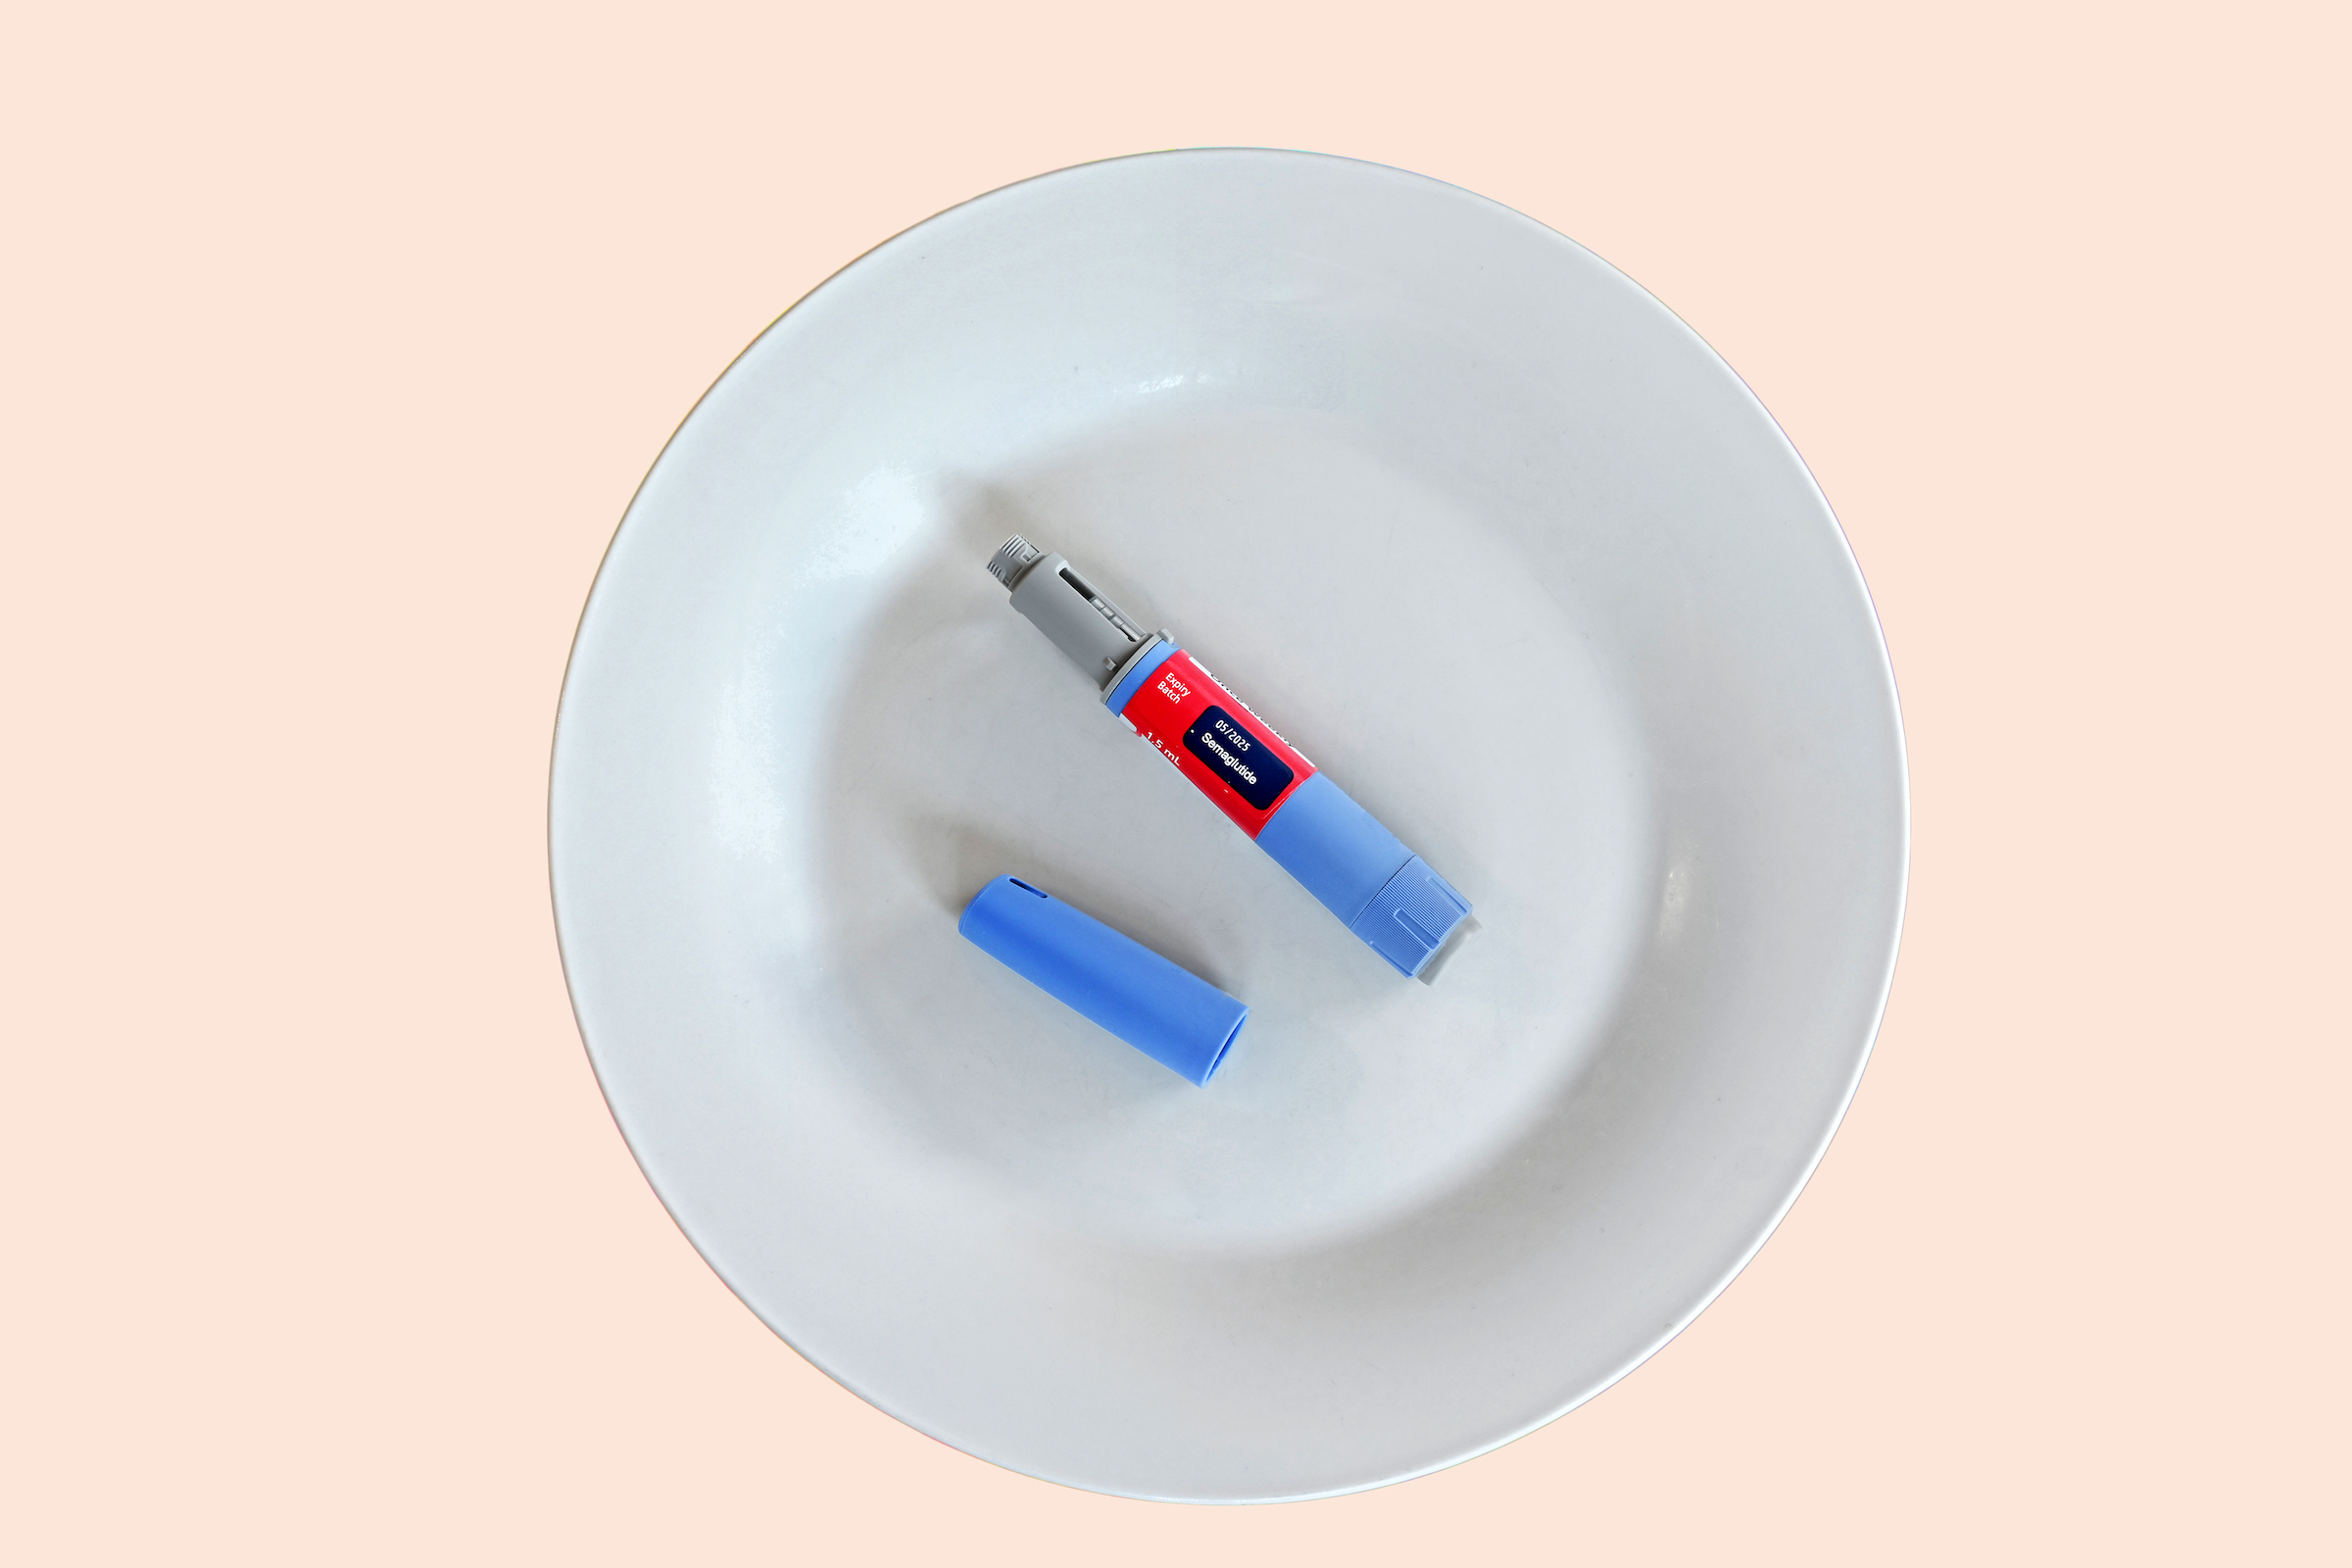 Semaglutide injecting  pen with lid on a white plate. (Getty Images)